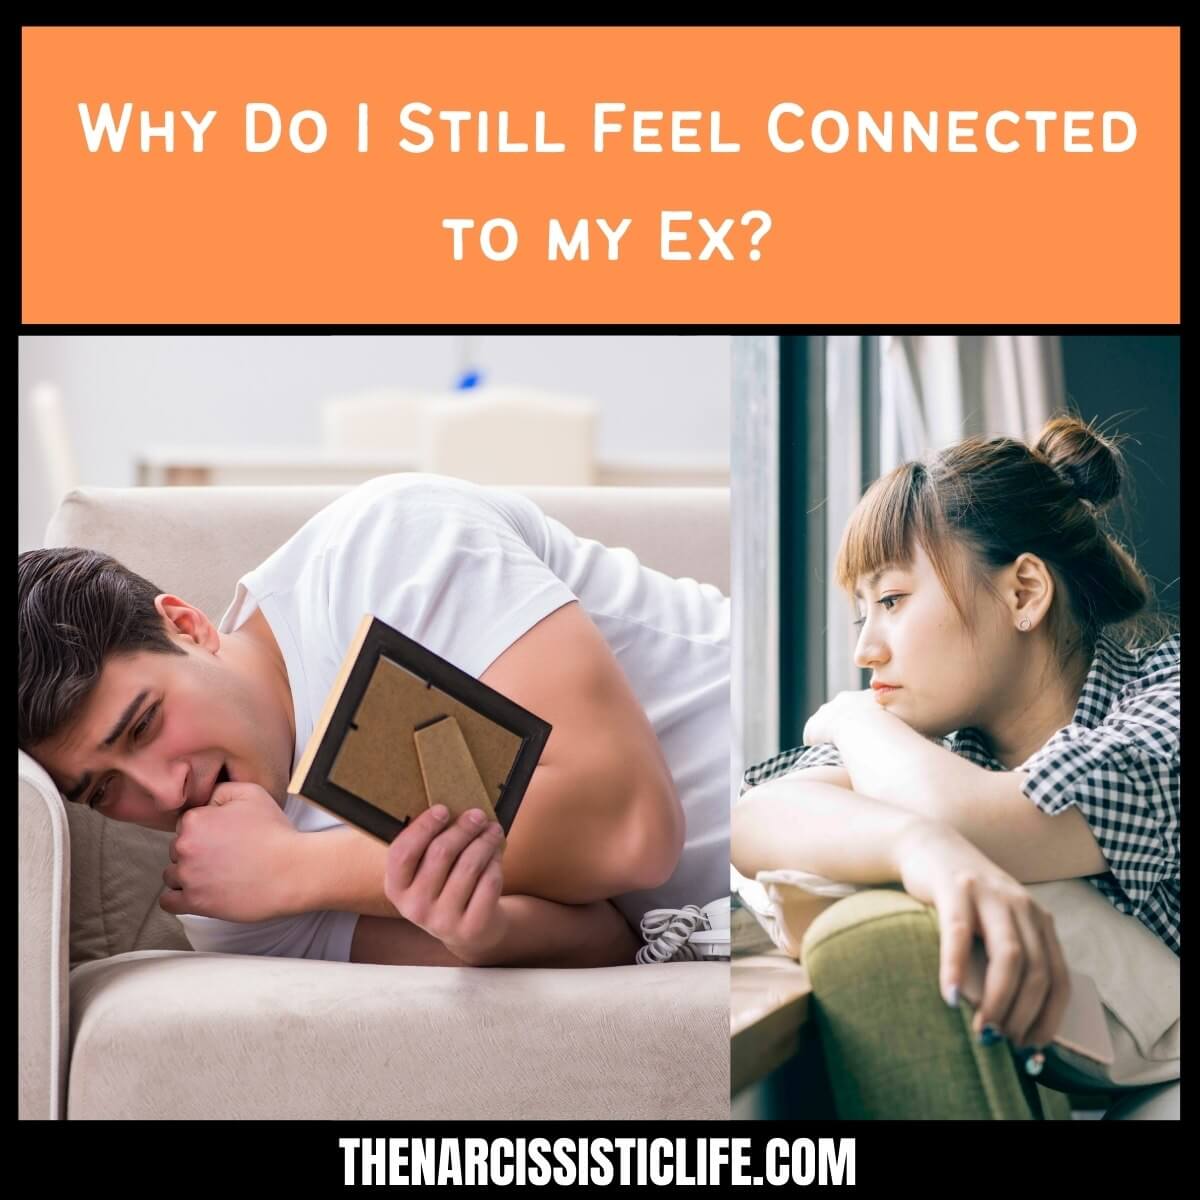 Why Do I Still Feel Connected to my Ex